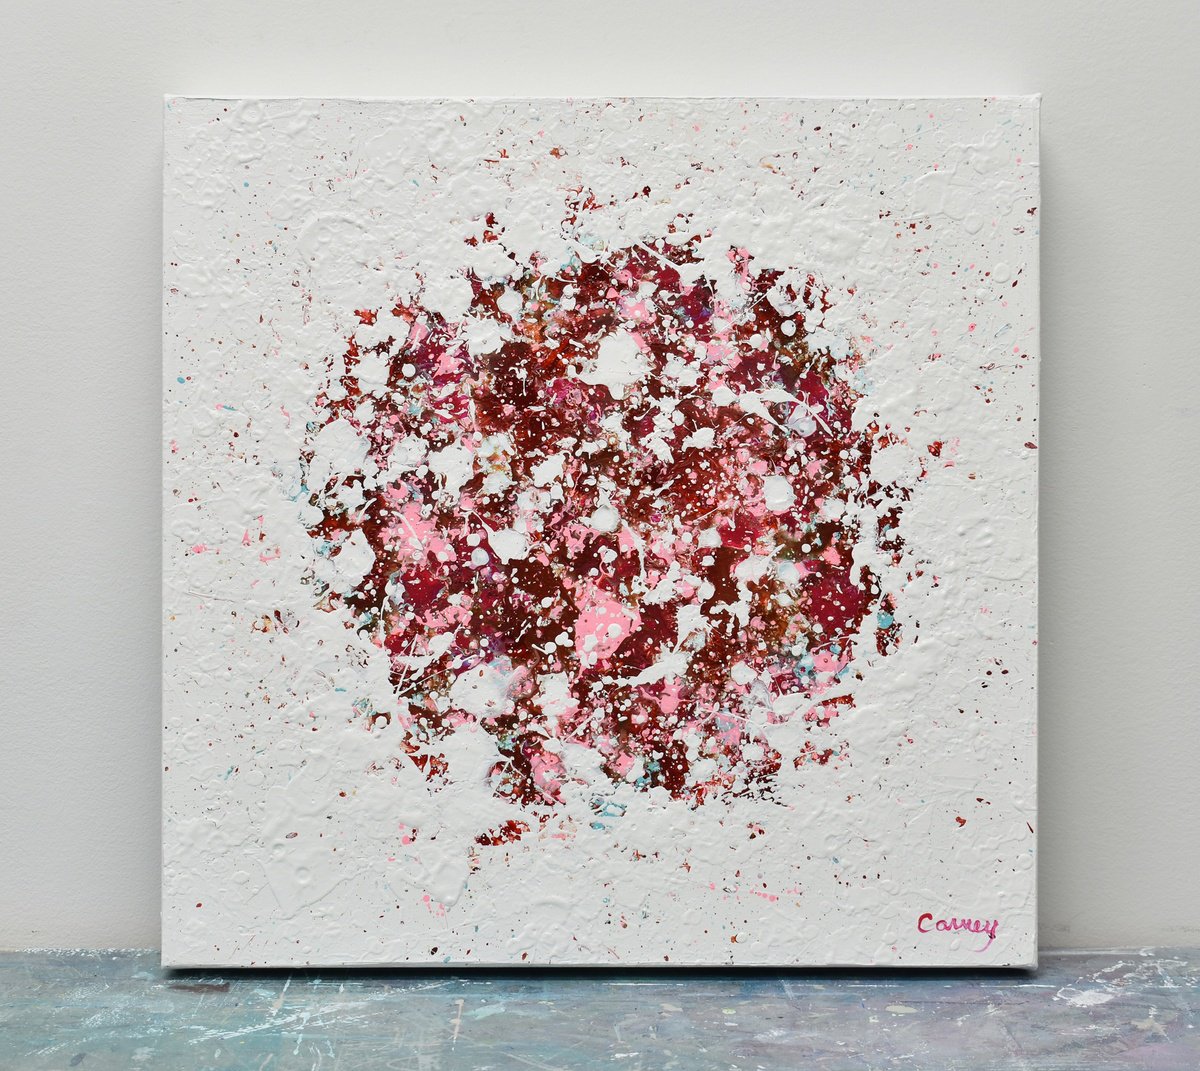 Petal Burst 47 - Abstract Expressionism art by Carney